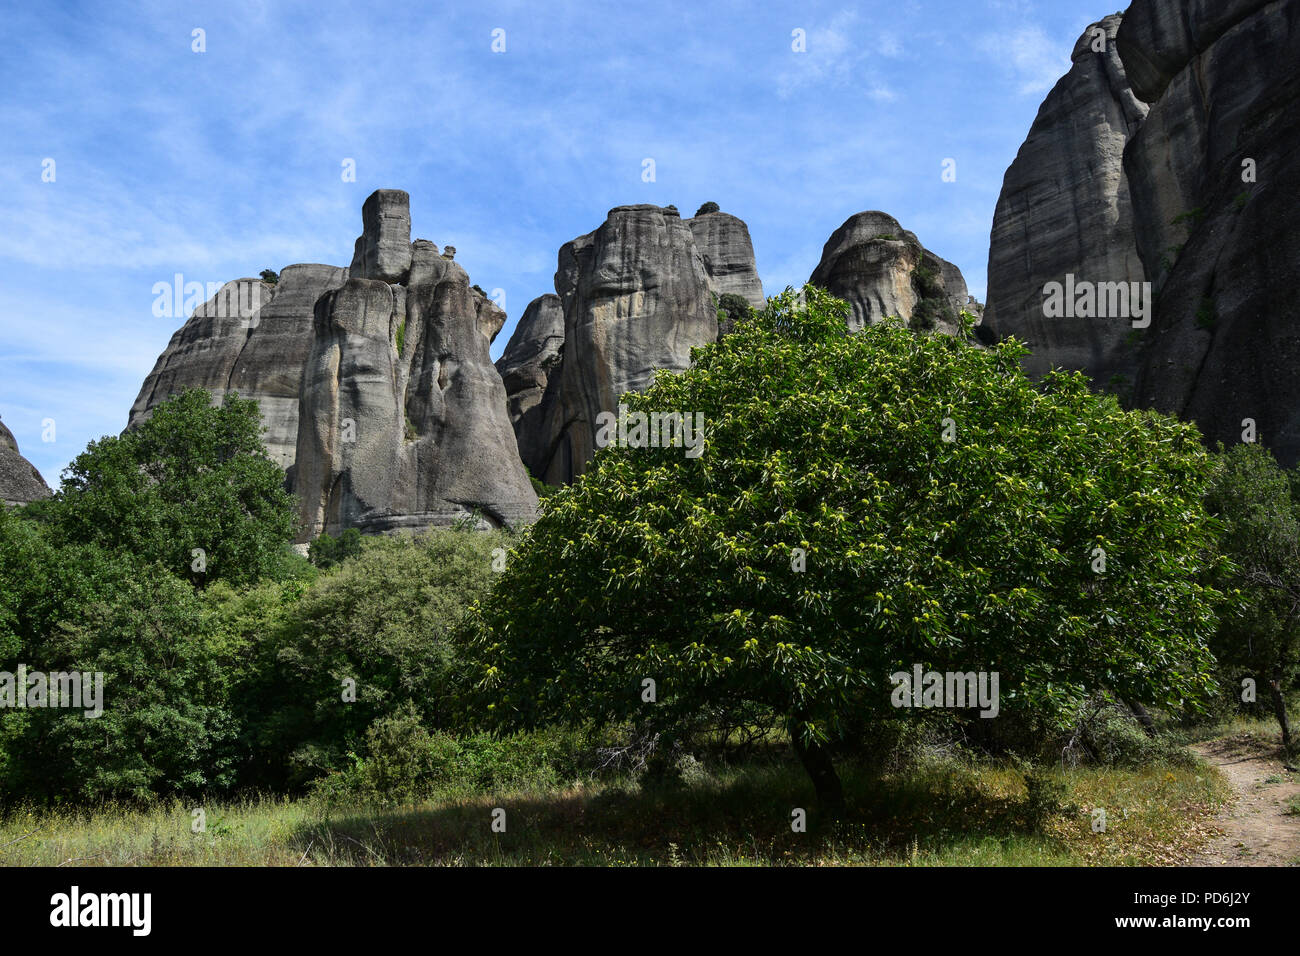 The Meteora is a rock formation in central Greece hosting one of the largest and most precipitously built complexes of Eastern Orthodox monasteries. Stock Photo